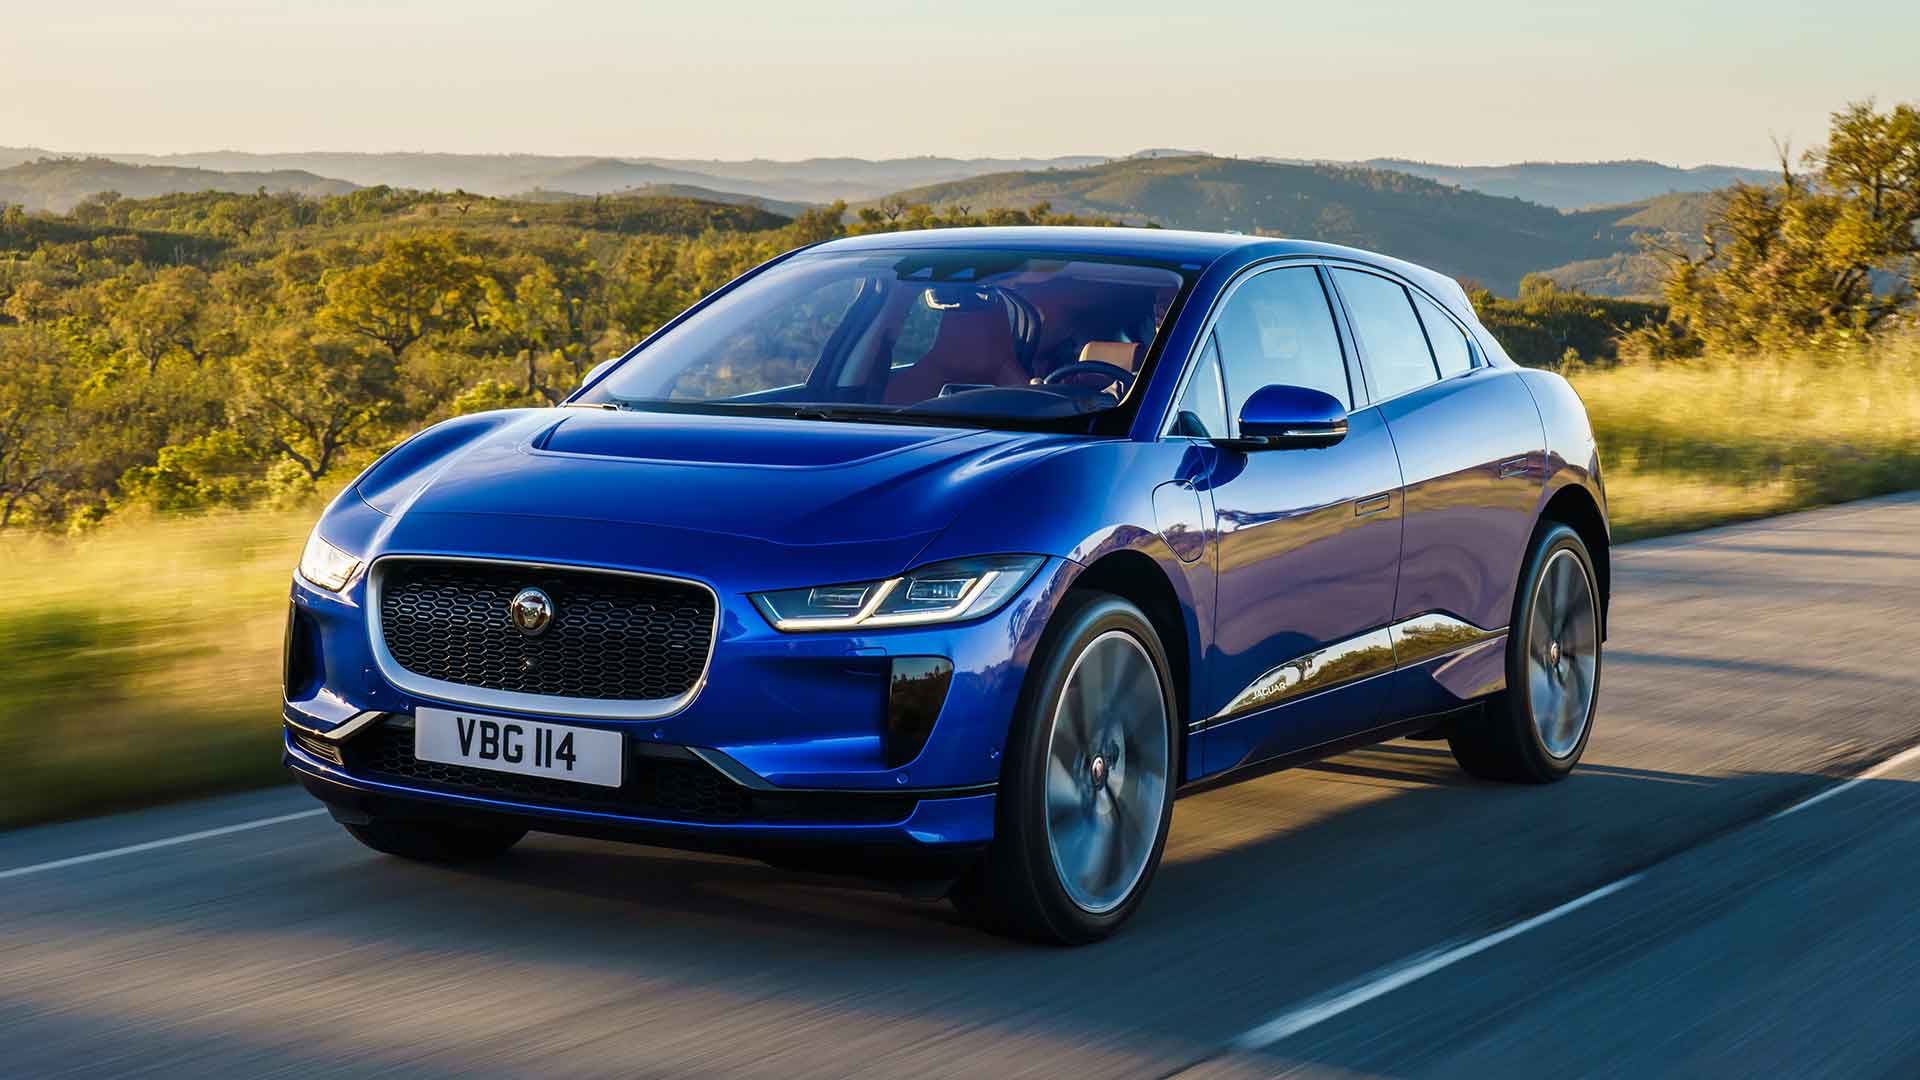 Experts pick the 10 safest new cars of 2019 – Motoring Research